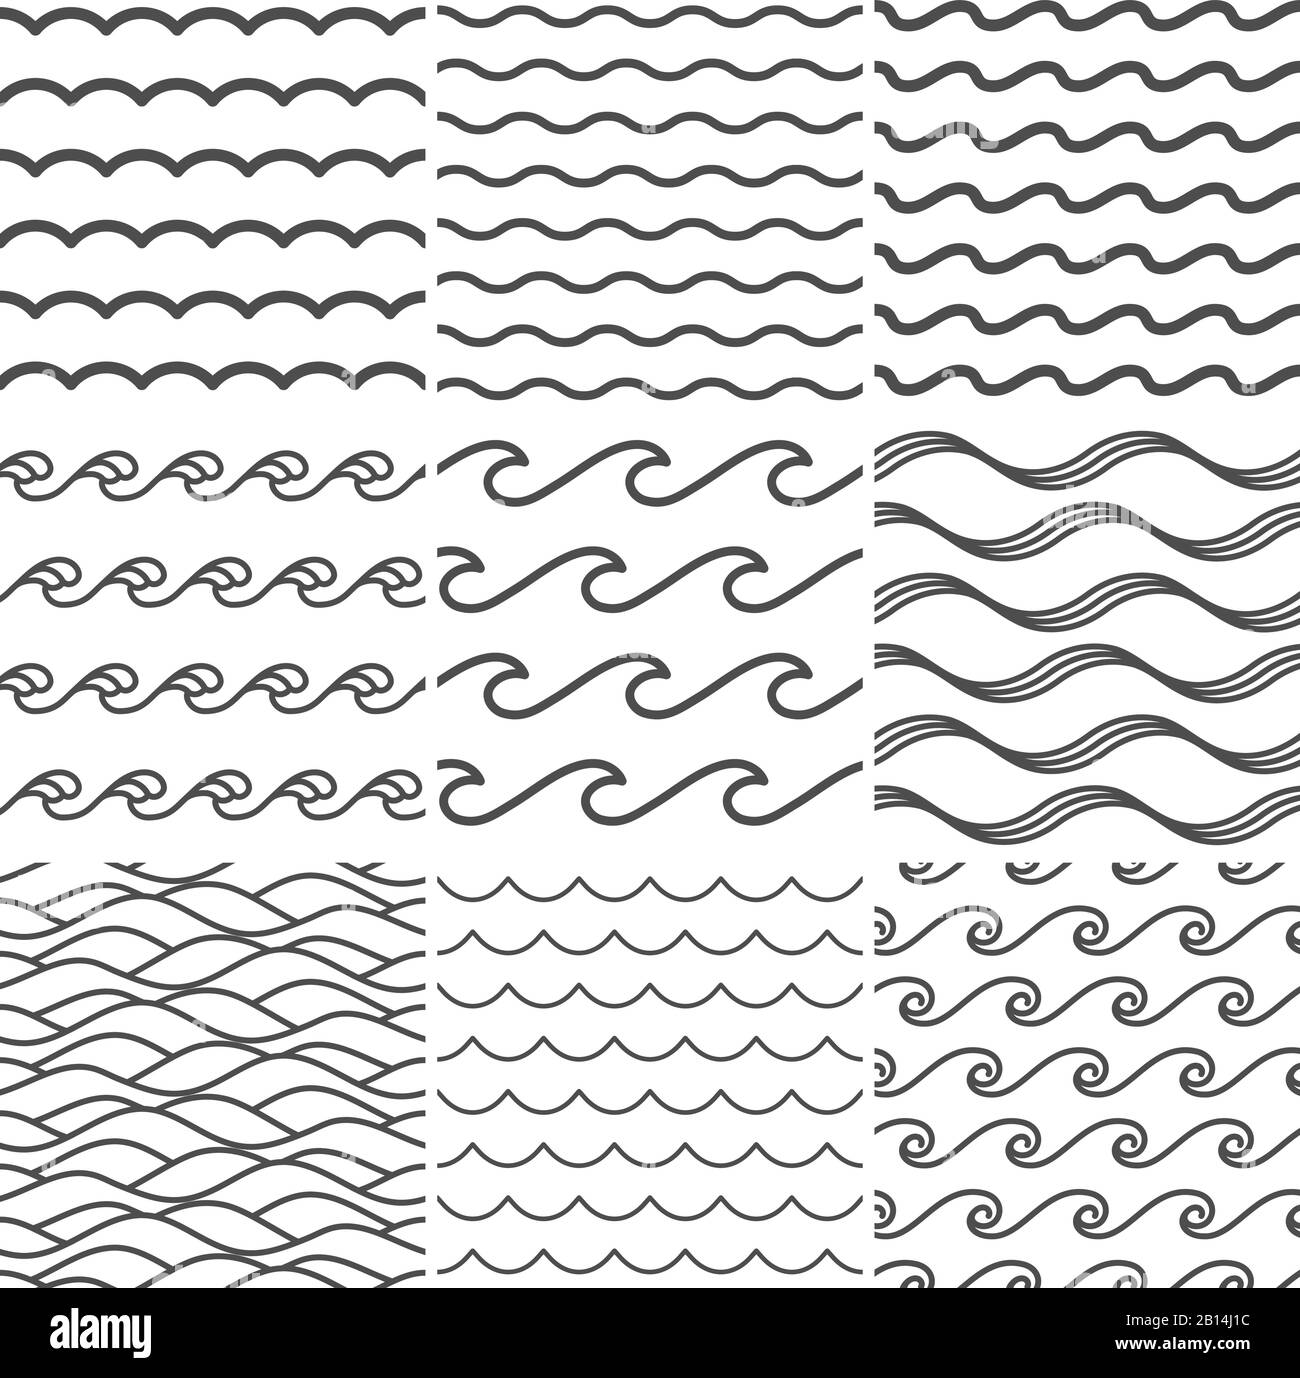 Seamless water waves pattern. Sea wave, ocean waters and wavy lake. Aqua patterns vector background collection Stock Vector